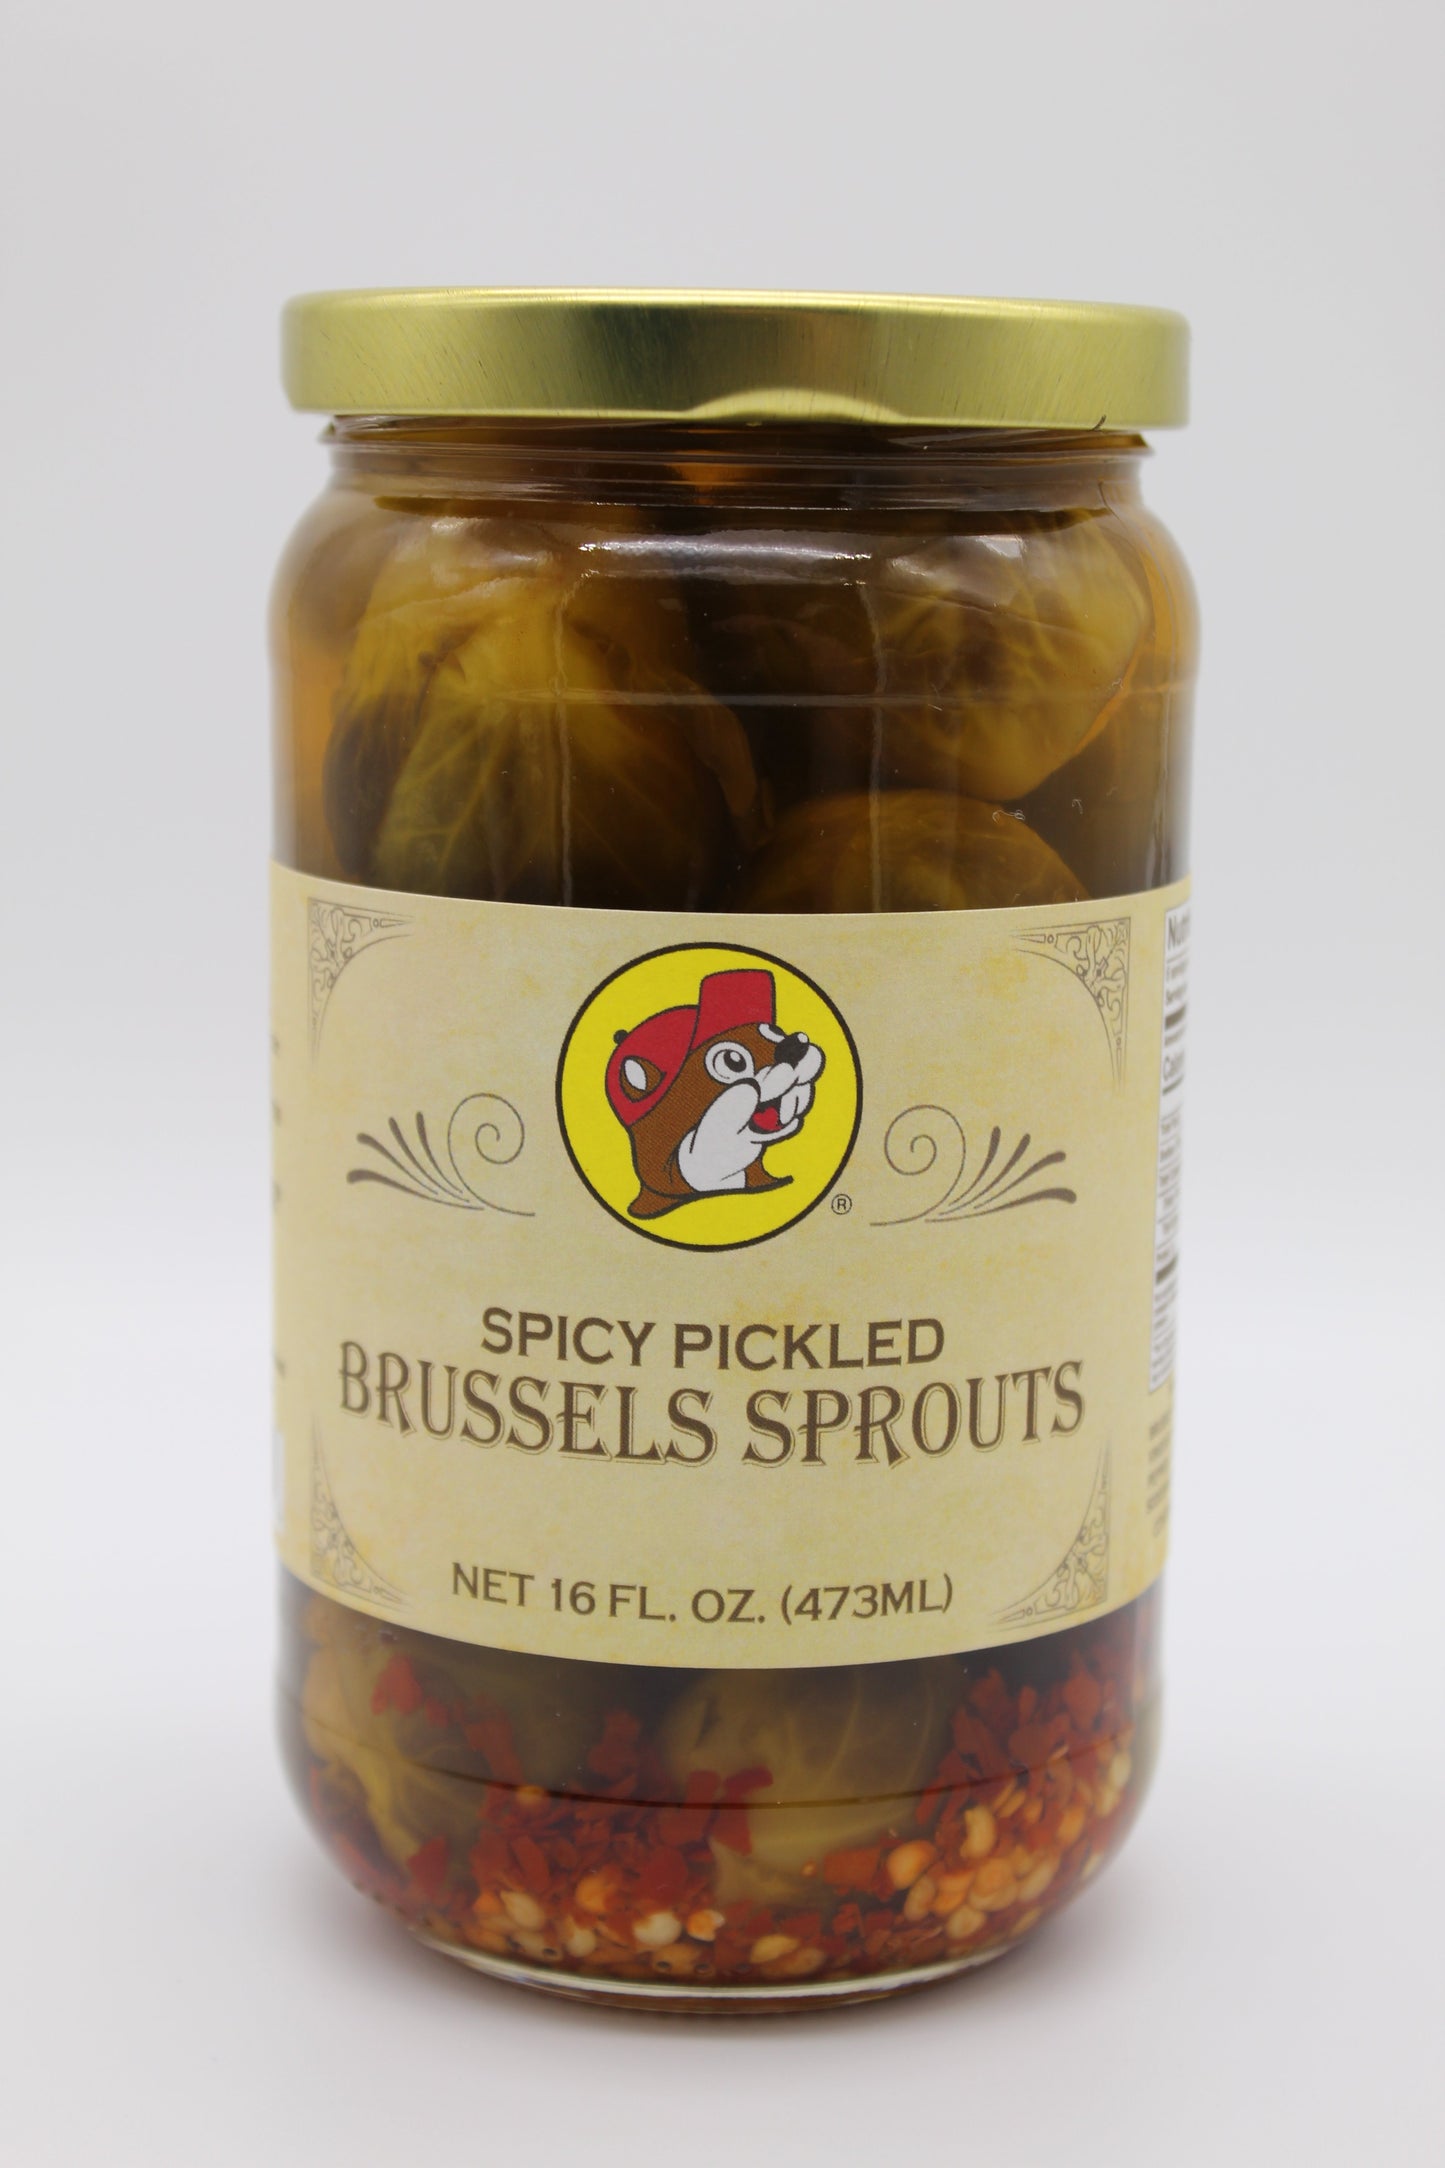 Buc-ee's Spicy Pickled Brussels Sprouts